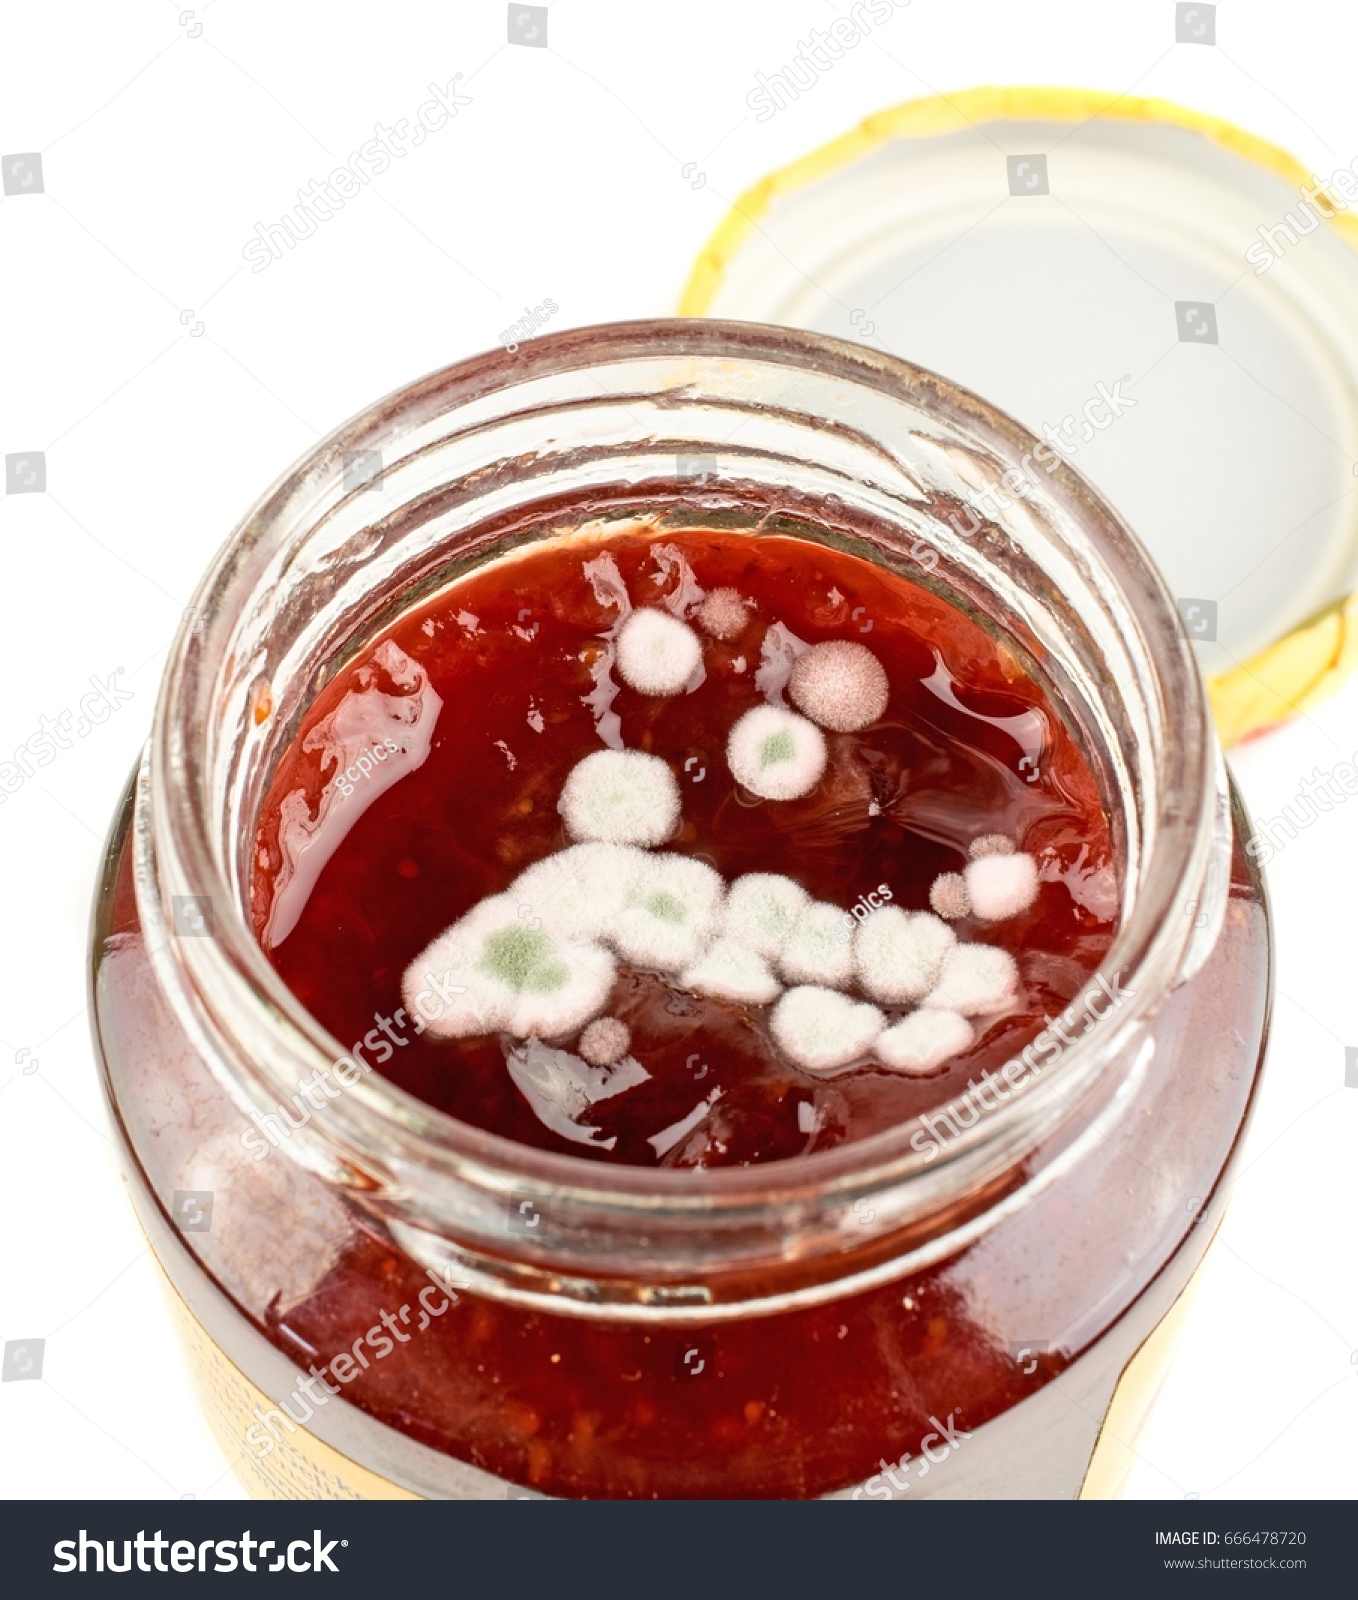 Download Open Jar Strawberry Jam Mould Growing Miscellaneous Stock Image 666478720 PSD Mockup Templates